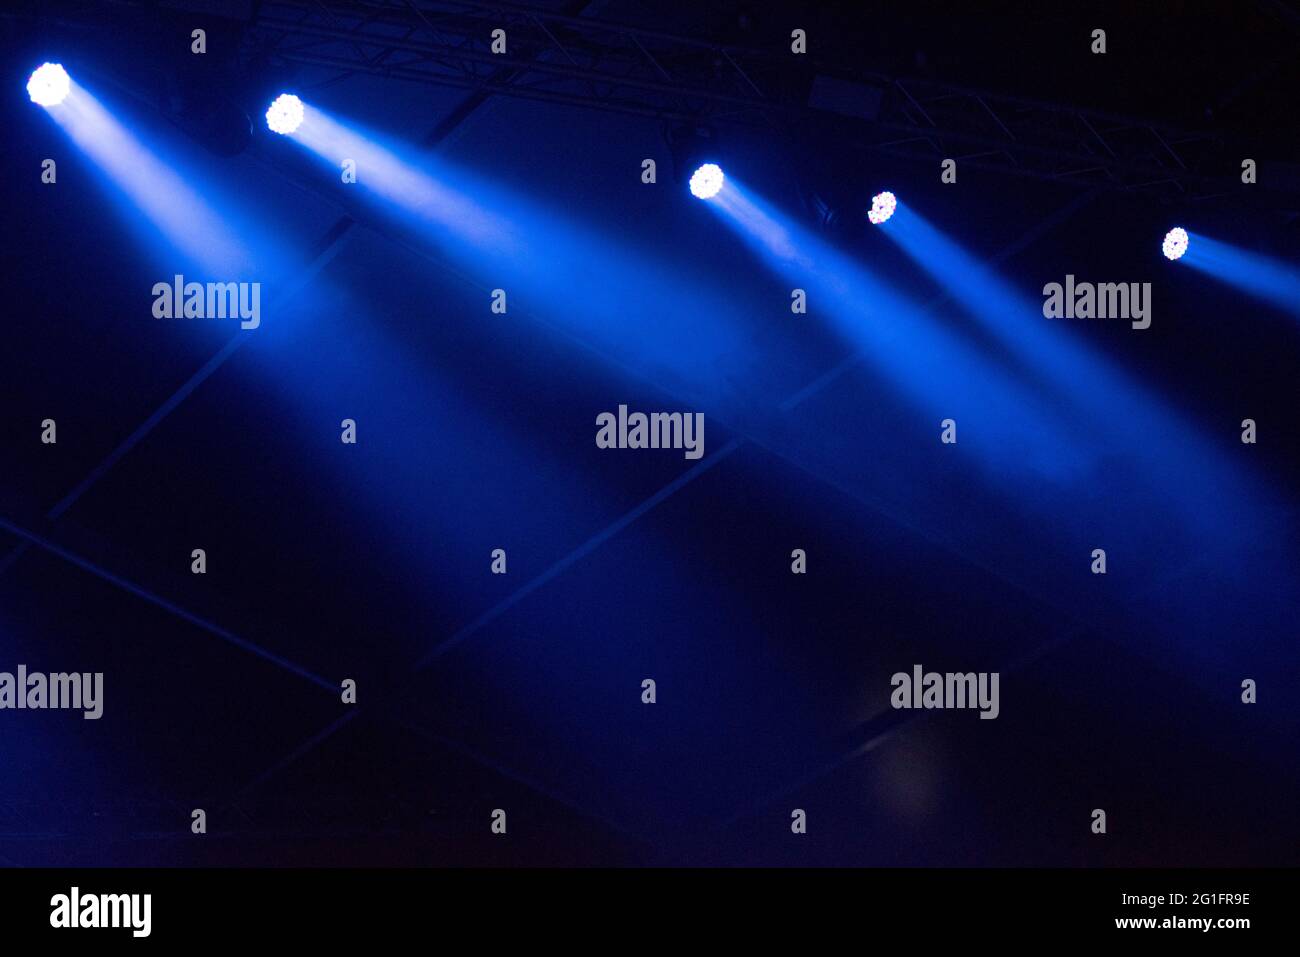 Blue stage lights glowing in the dark. Live music festival concept background Stock Photo